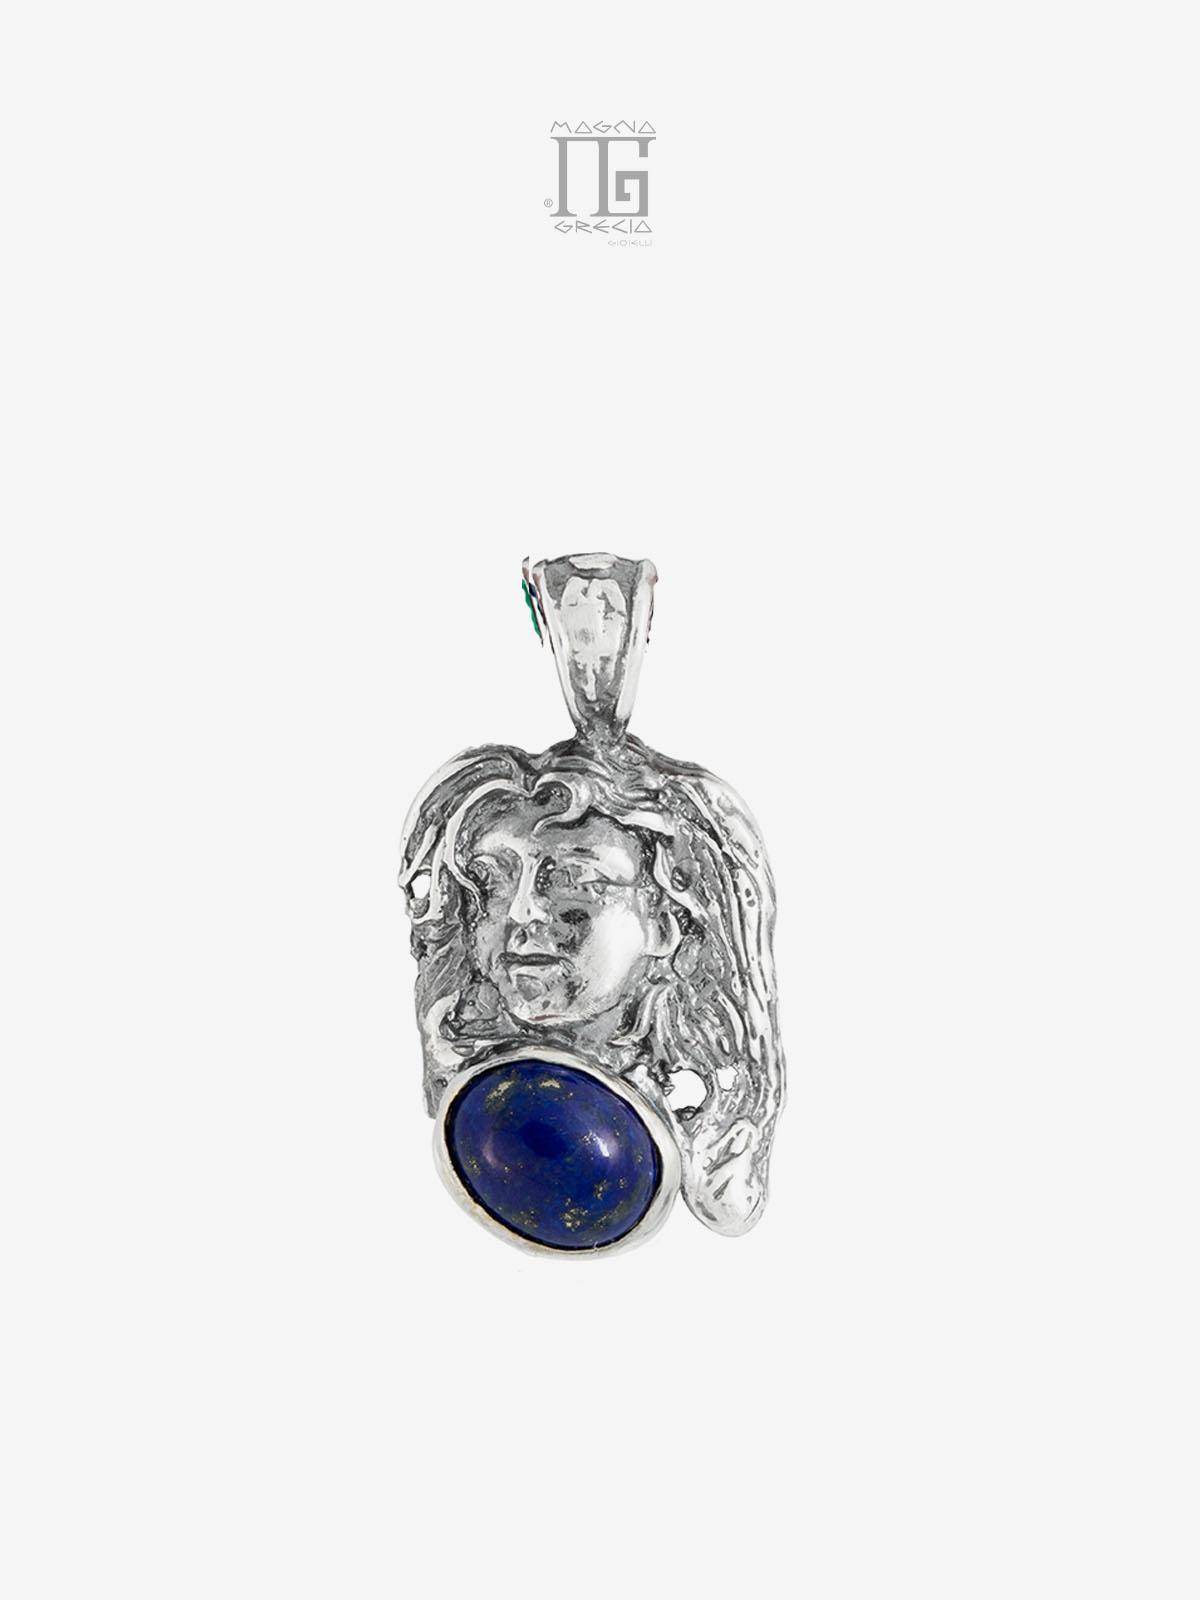 “Tranquility” Pendant in Silver with the Face of the Goddess Venus and Blue Lapis Lazuli Cod. MGK 3850 V-4